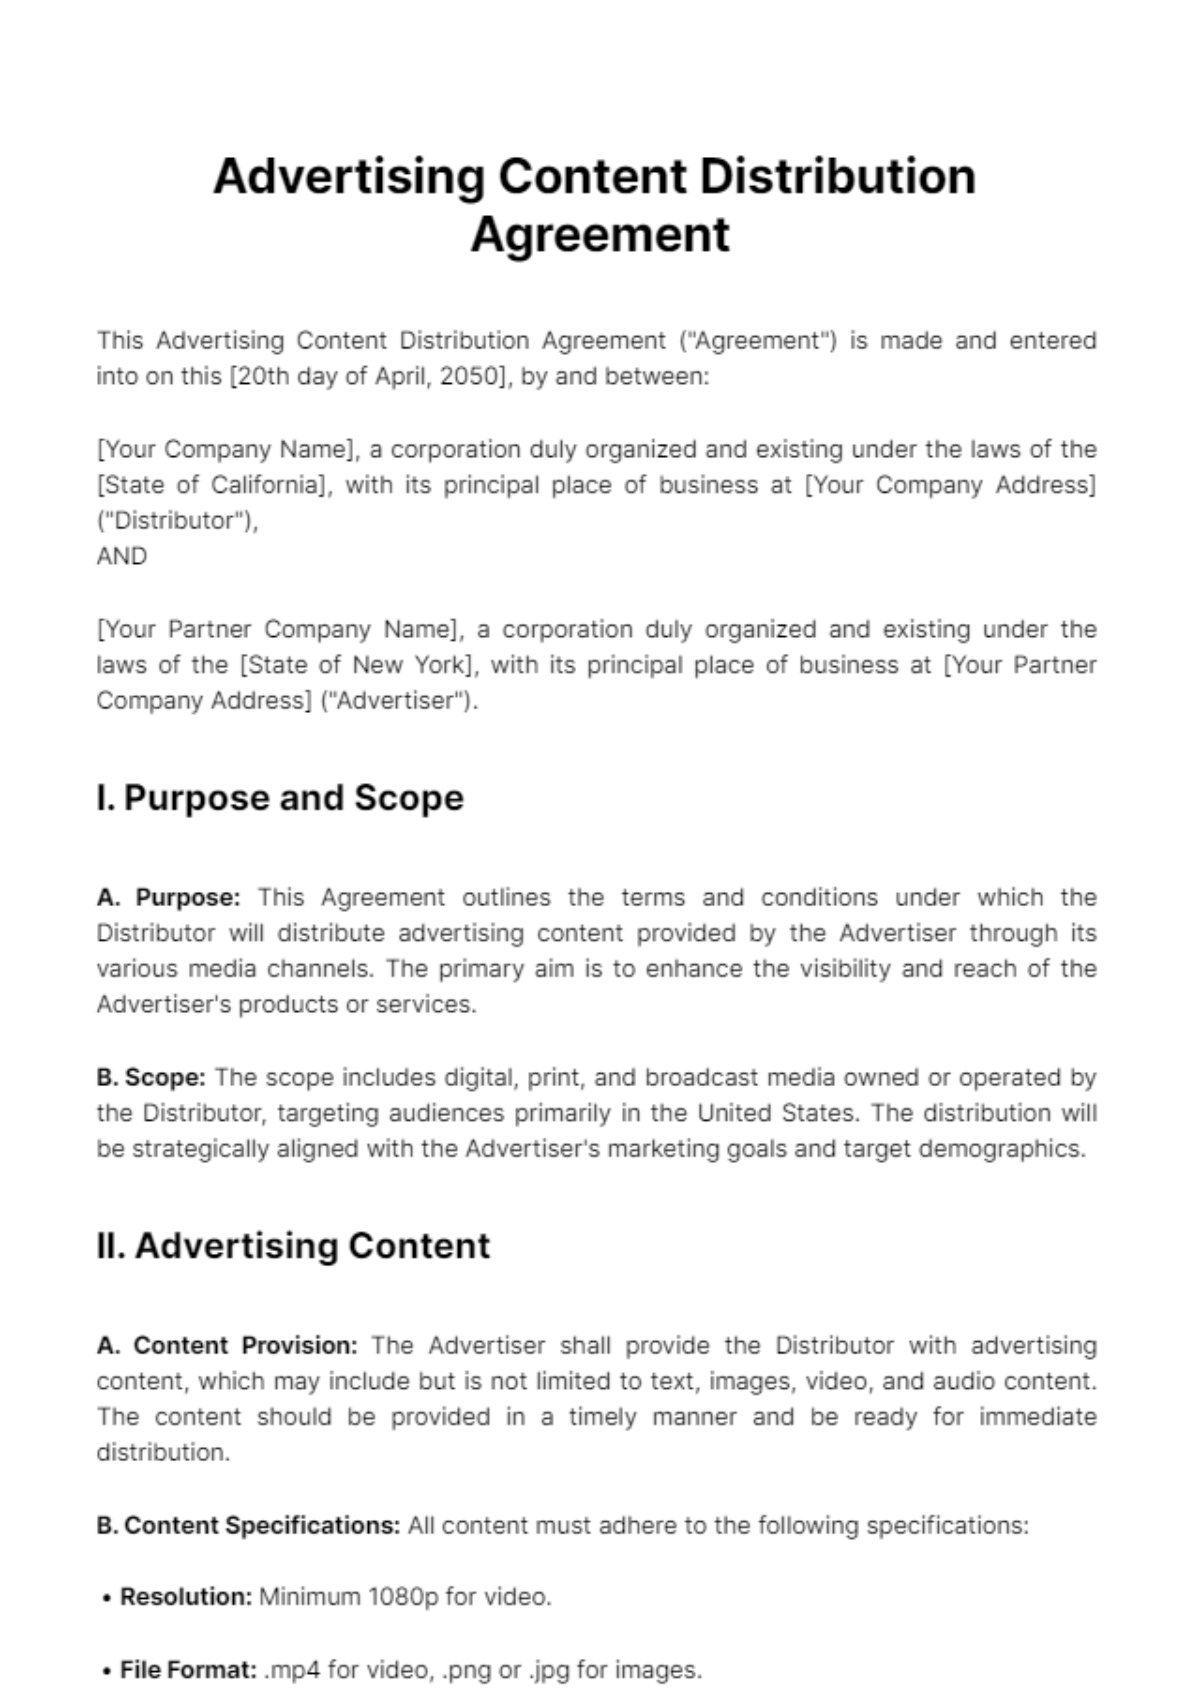 Free Advertising Content Distribution Agreement Template